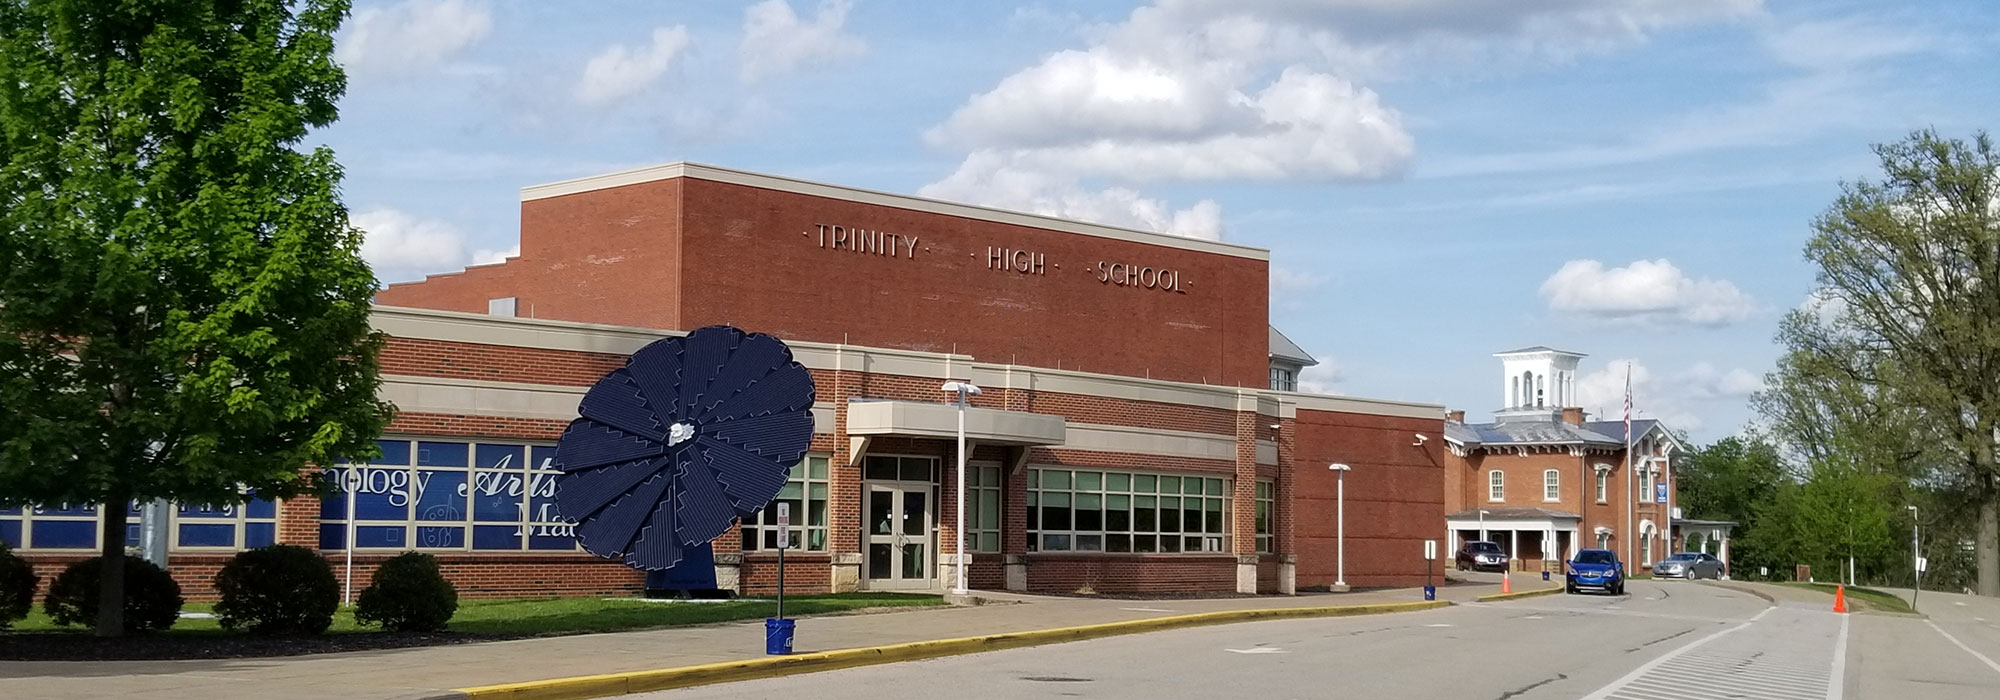 Trinity High School Uses Smartflowers to Support Students and Community